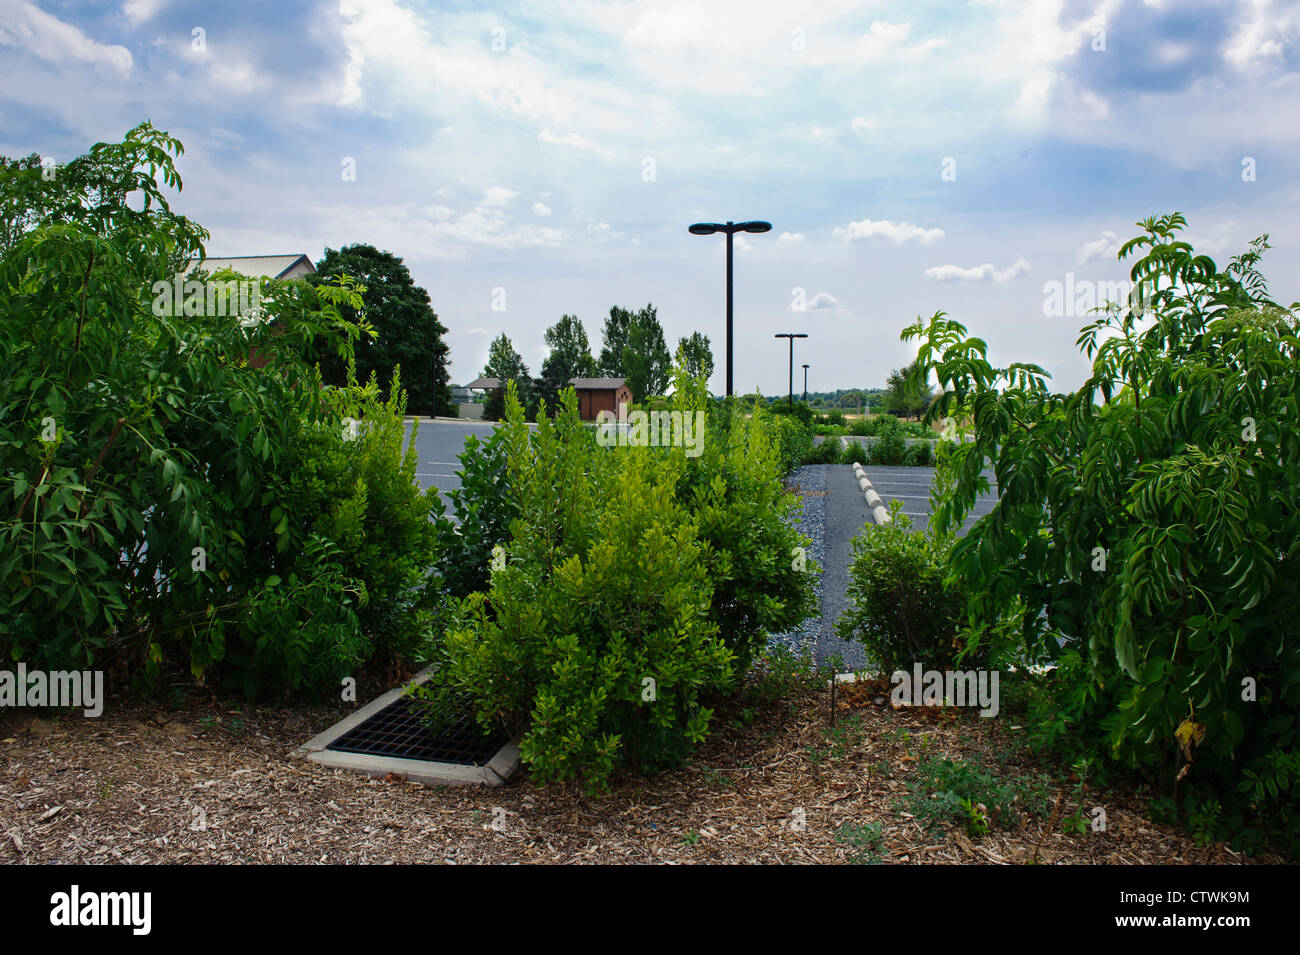 VEGETATED SWALE WITH OVERFLOW DRAIN IN PARKING LOT WITH PERMEABLE PAVEMENT FOR WATER INFILTRATION Stock Photo